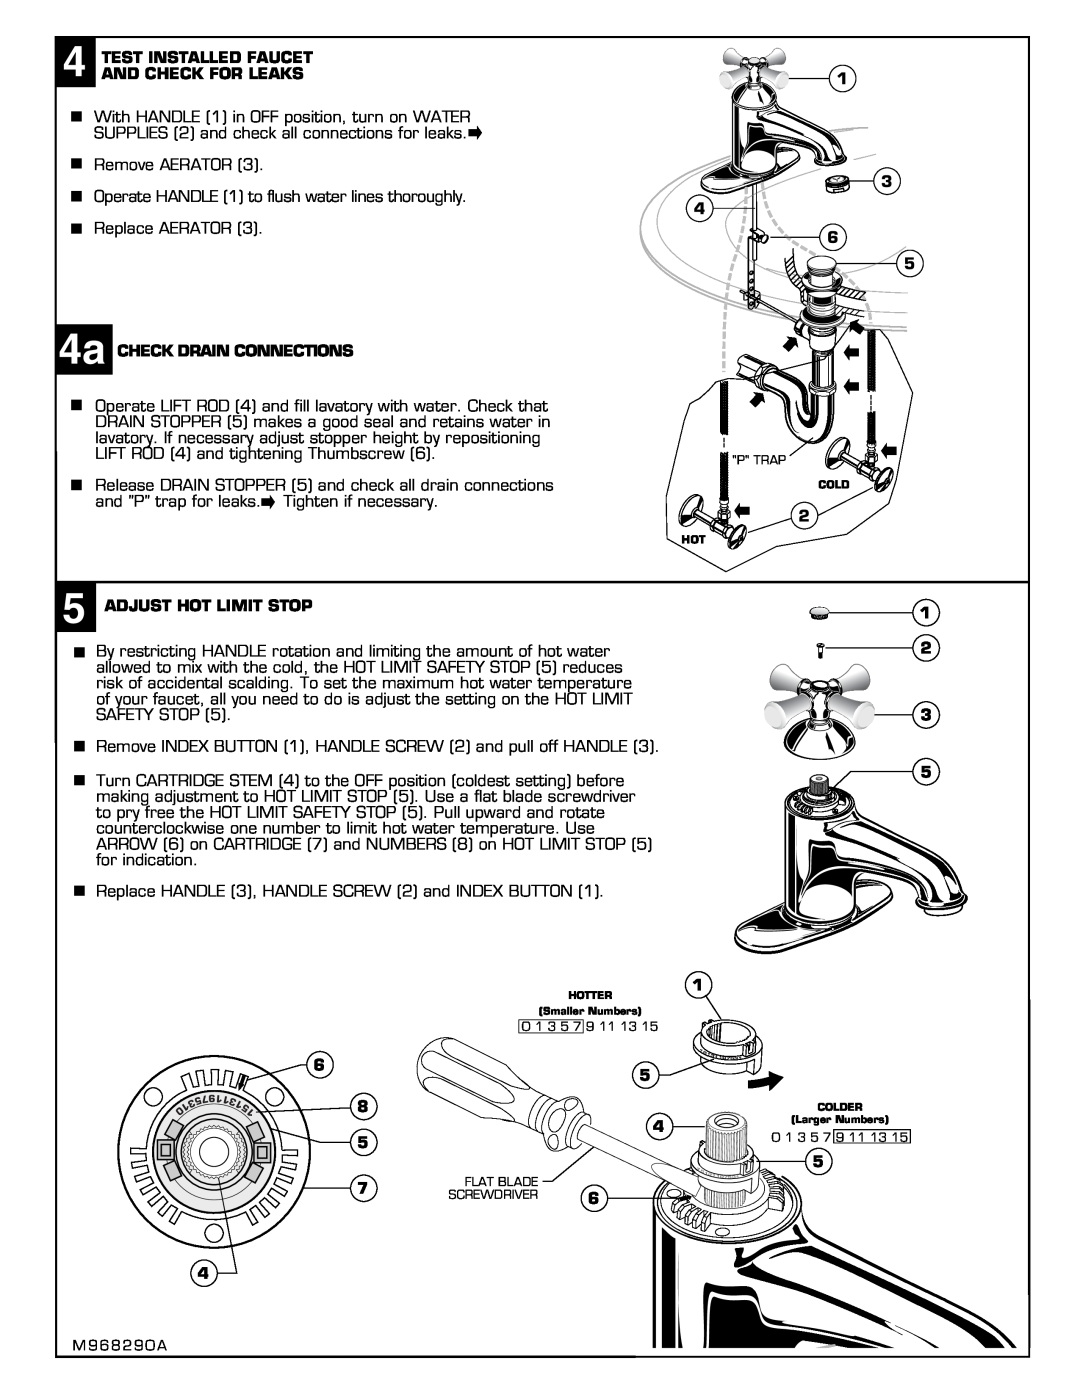 American Standard 2071S installation instructions Test Installed Faucet And Check For Leaks 